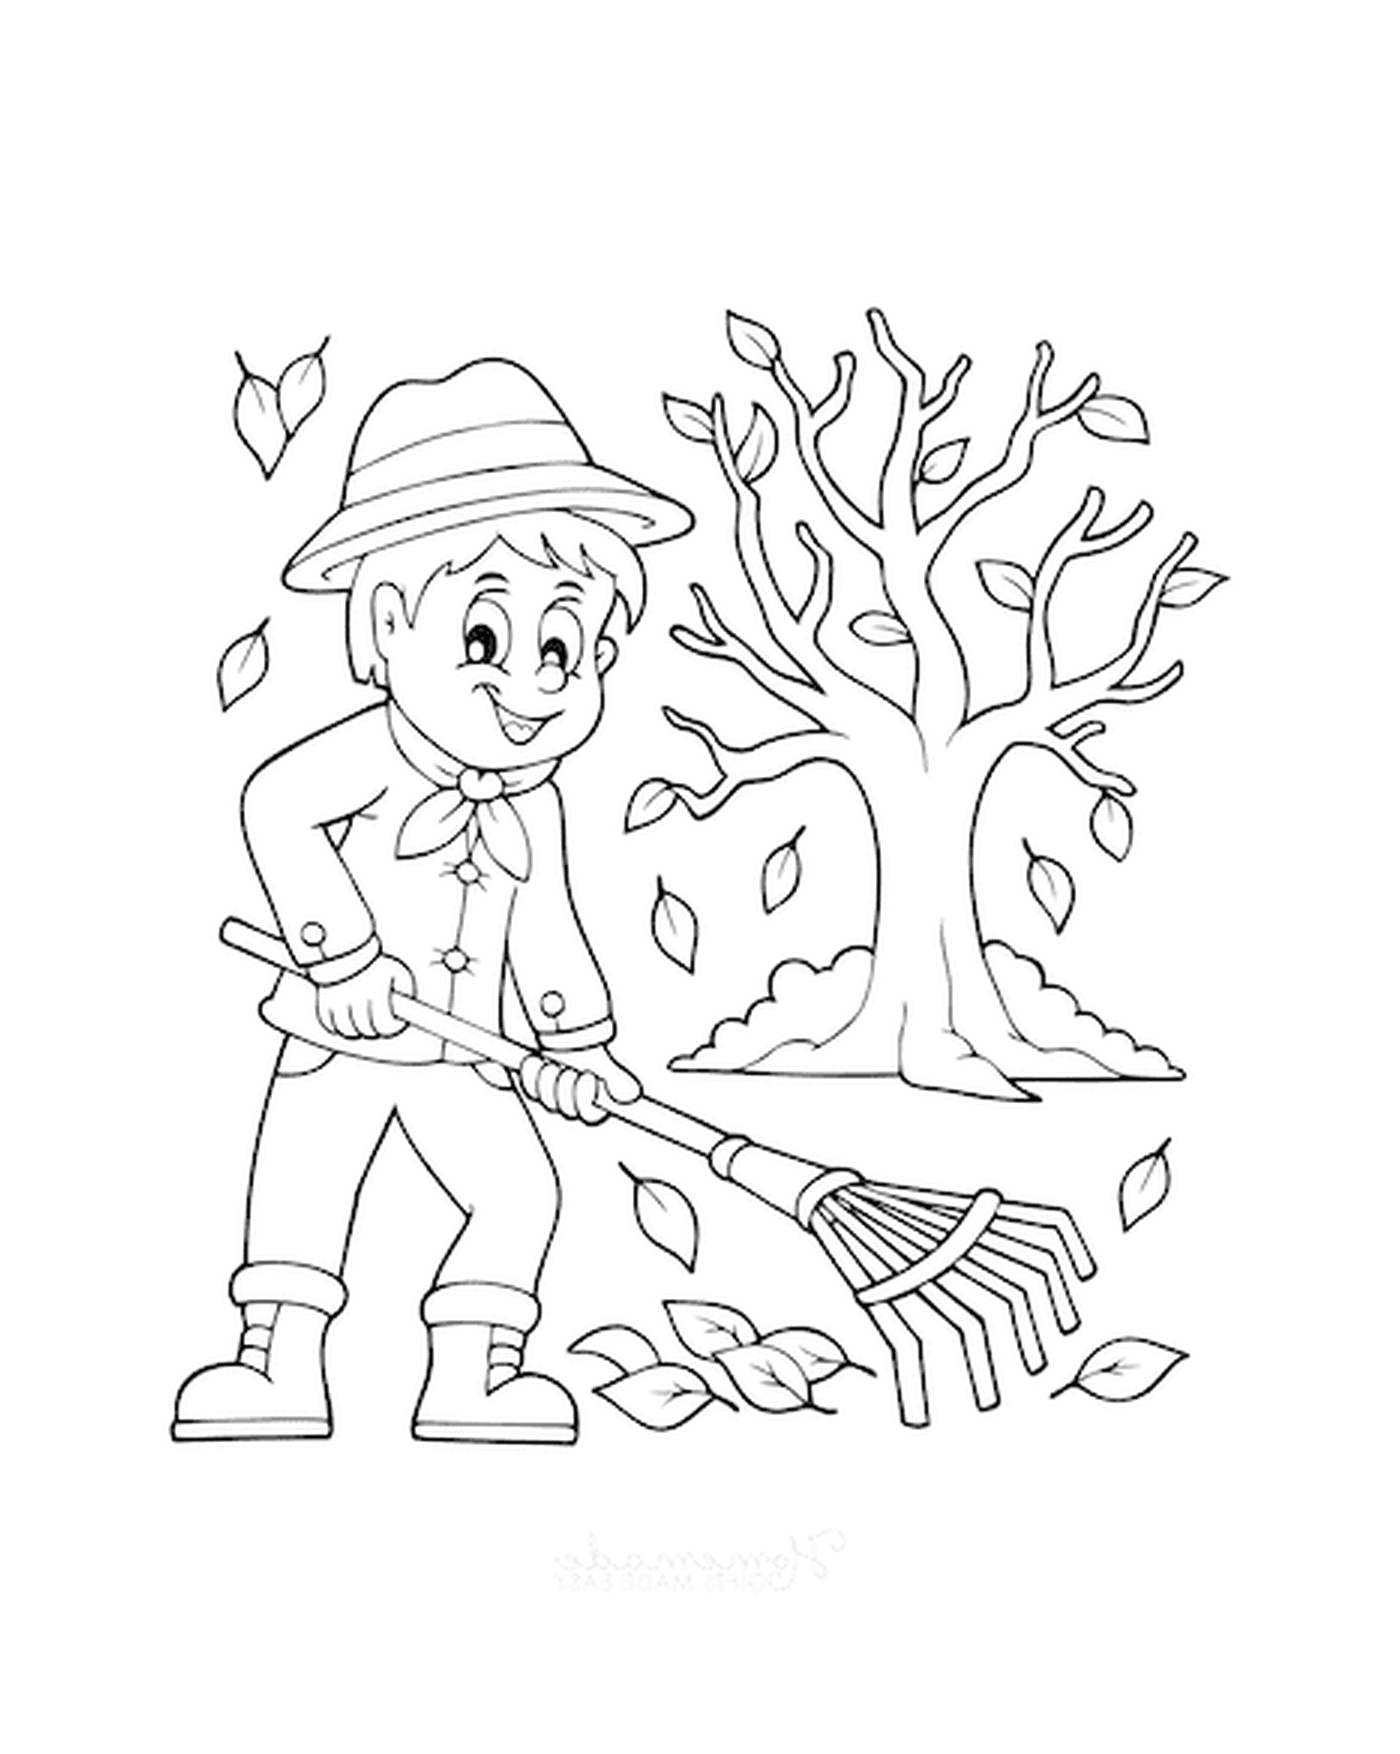  Boy rattling autumn leaves with a rake 